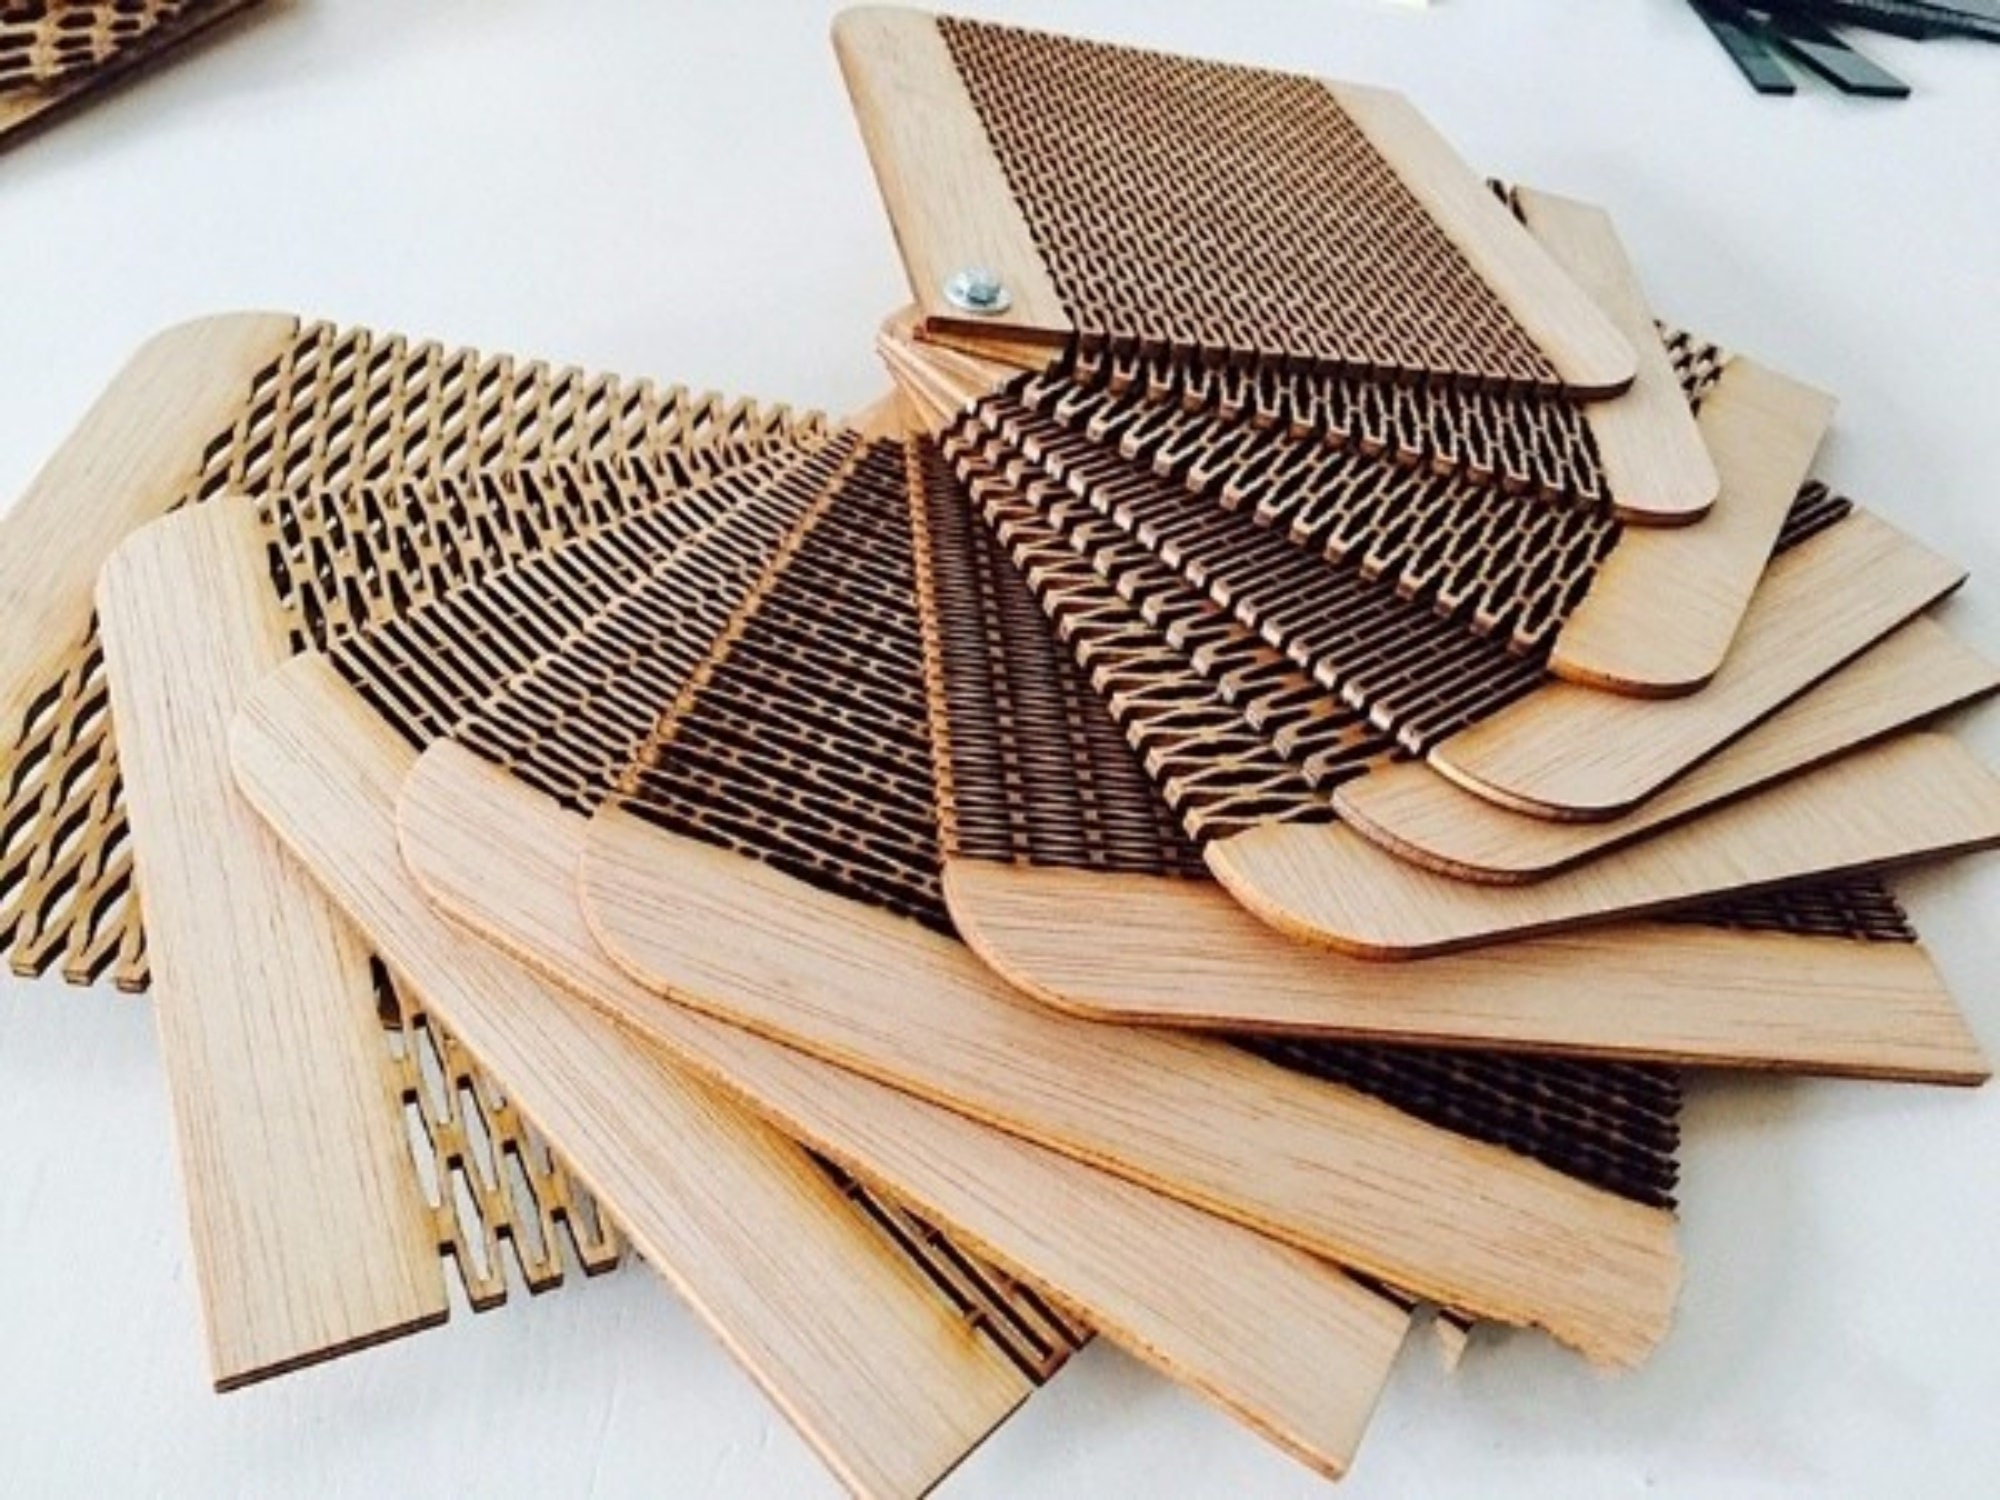 Choose between MDF and Plywood when to use which material for Laser Cutting, by RazorLAB